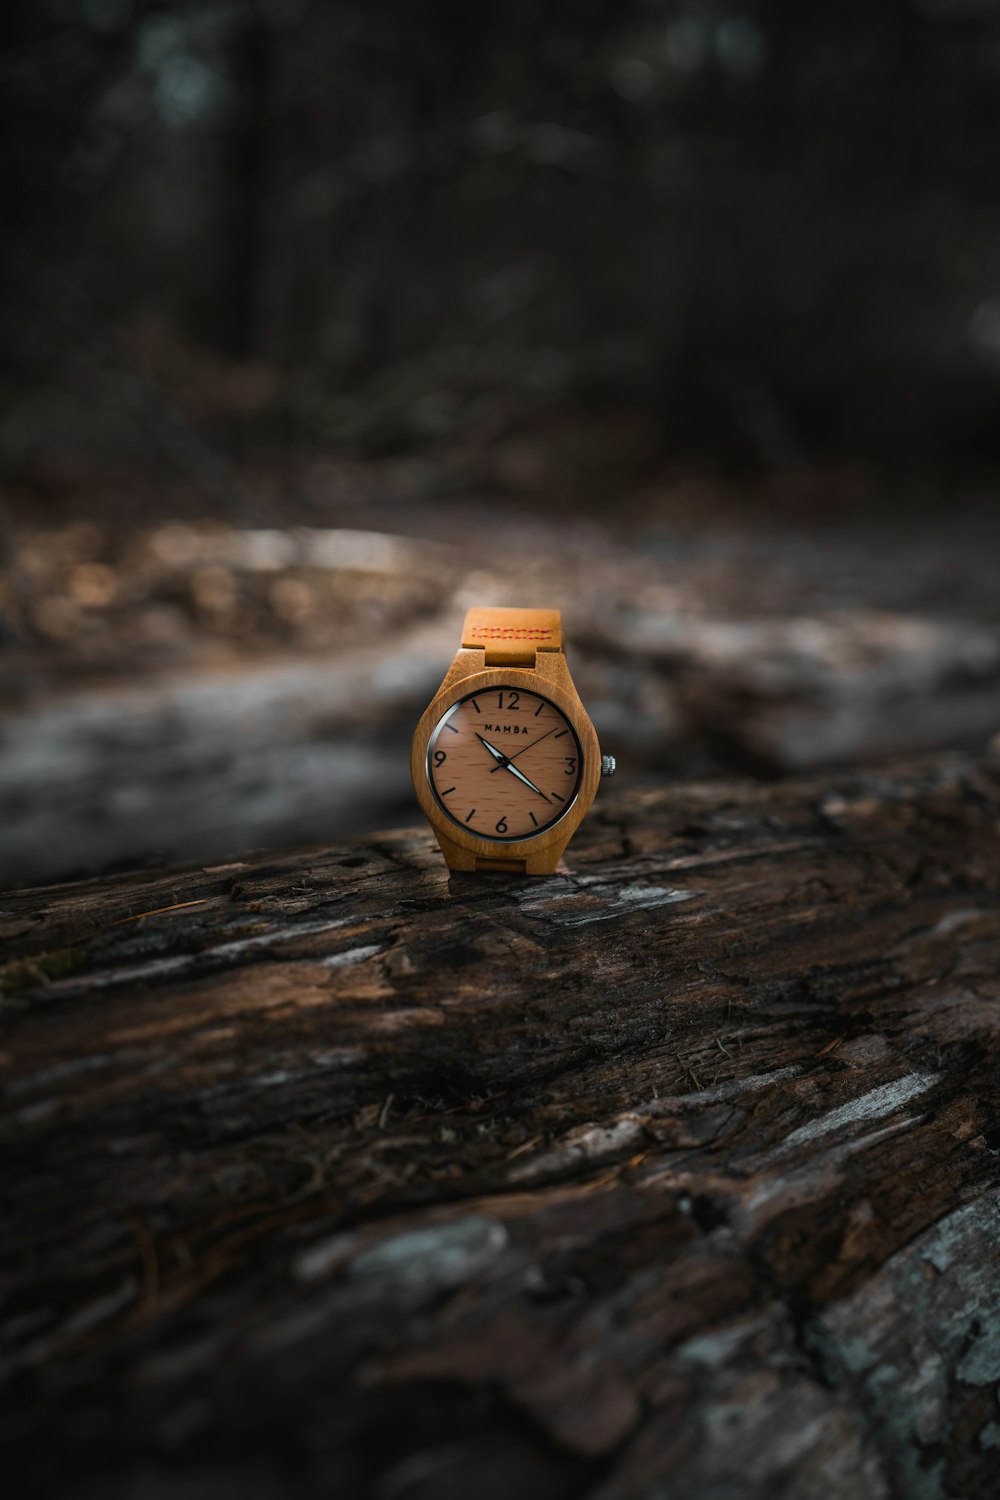 orange and white analog watch on brown wooden surface